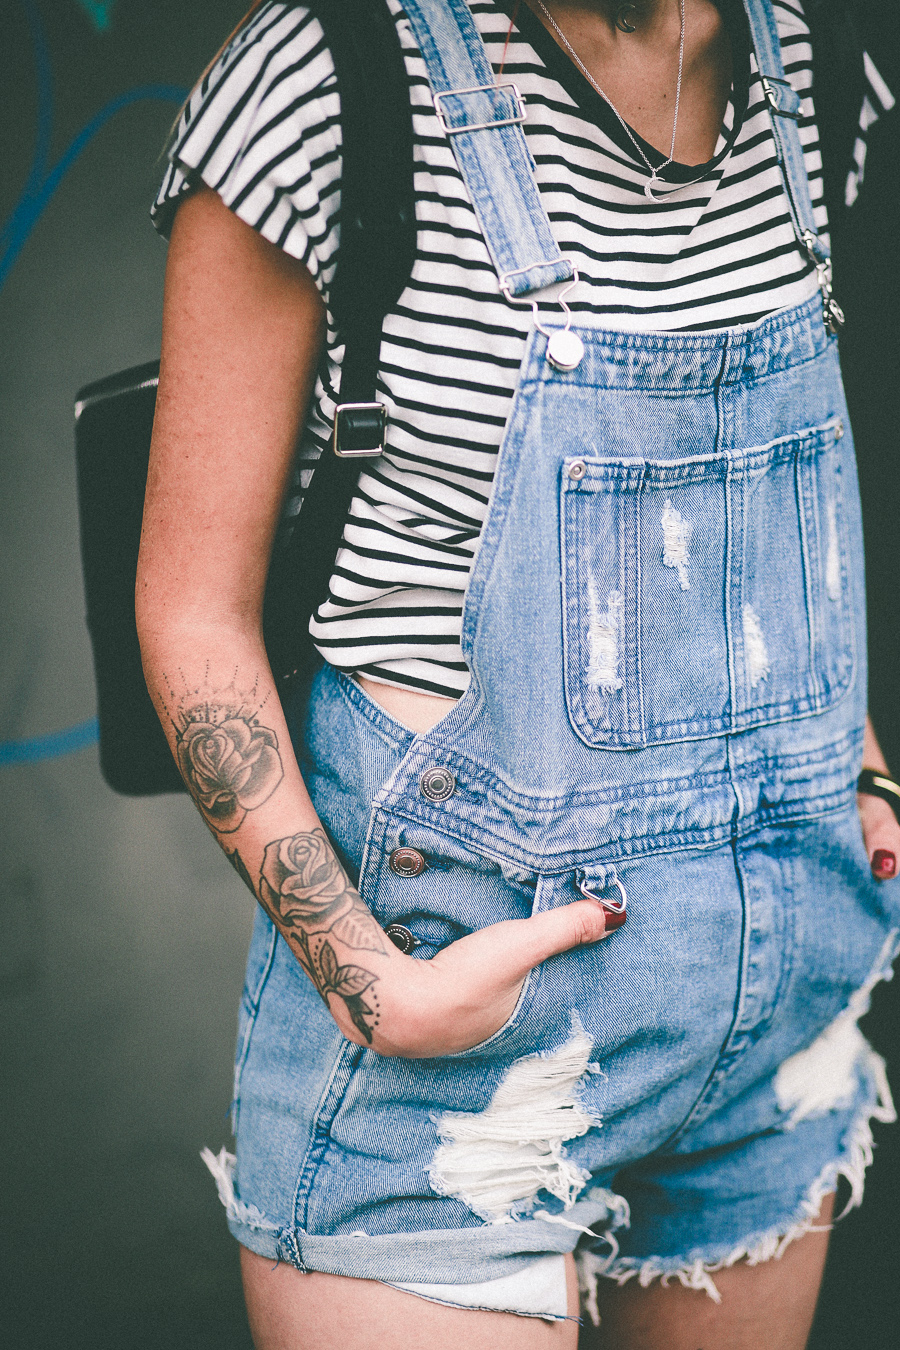 Le Happy wearing ASOS overalls and striped tee